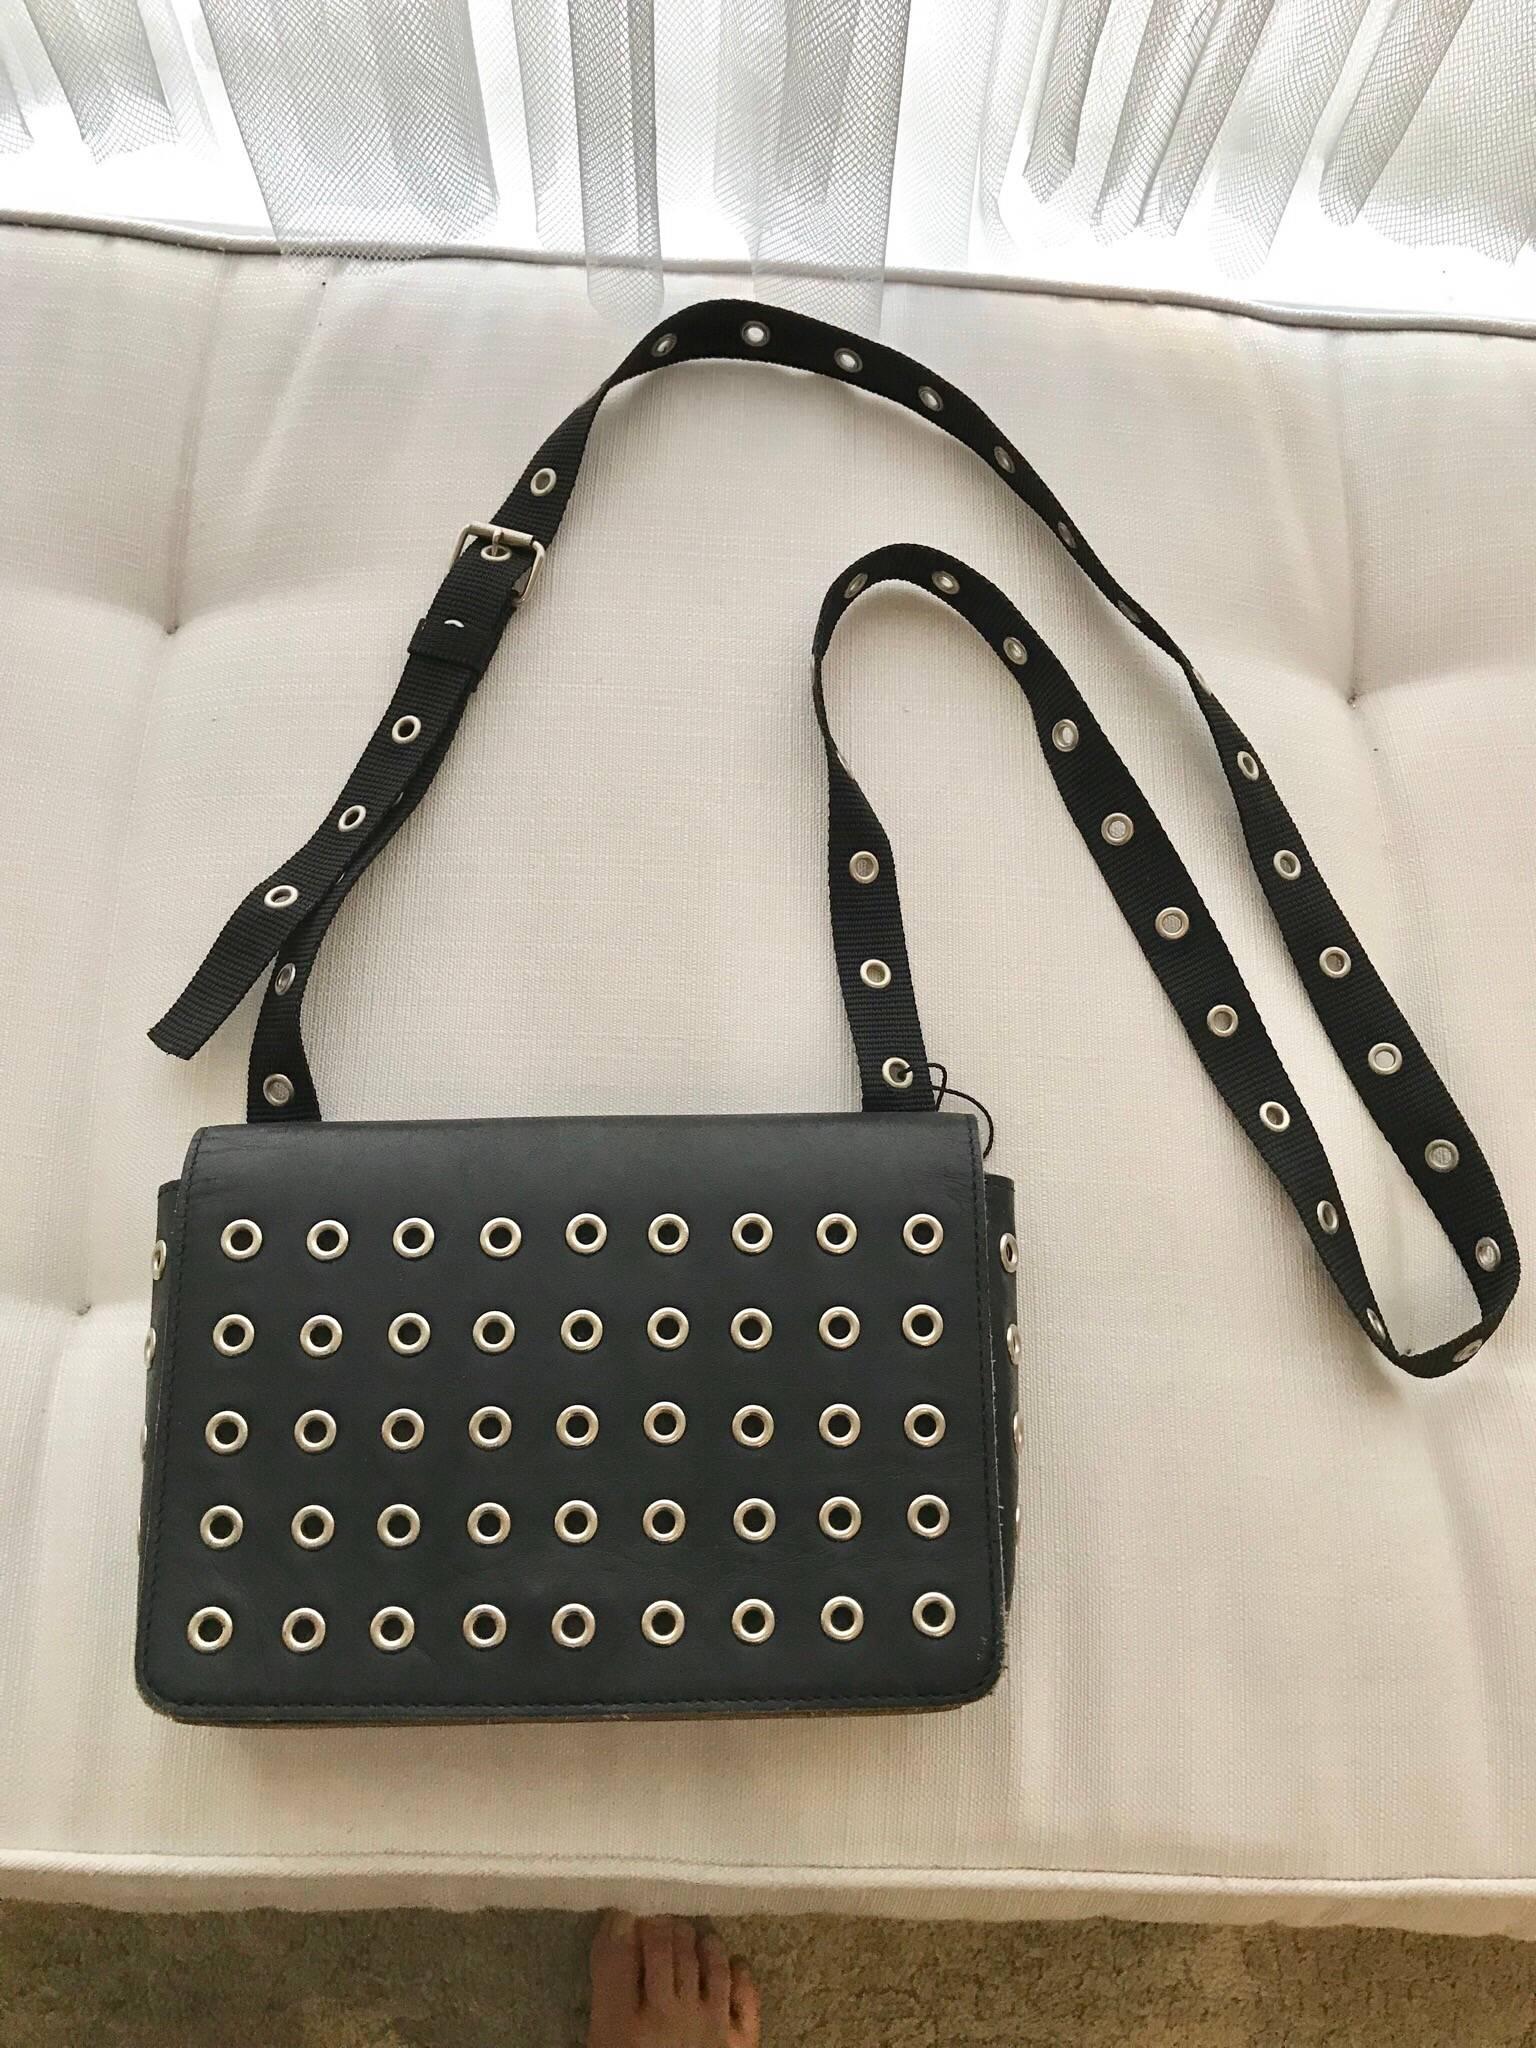 bag with grommets